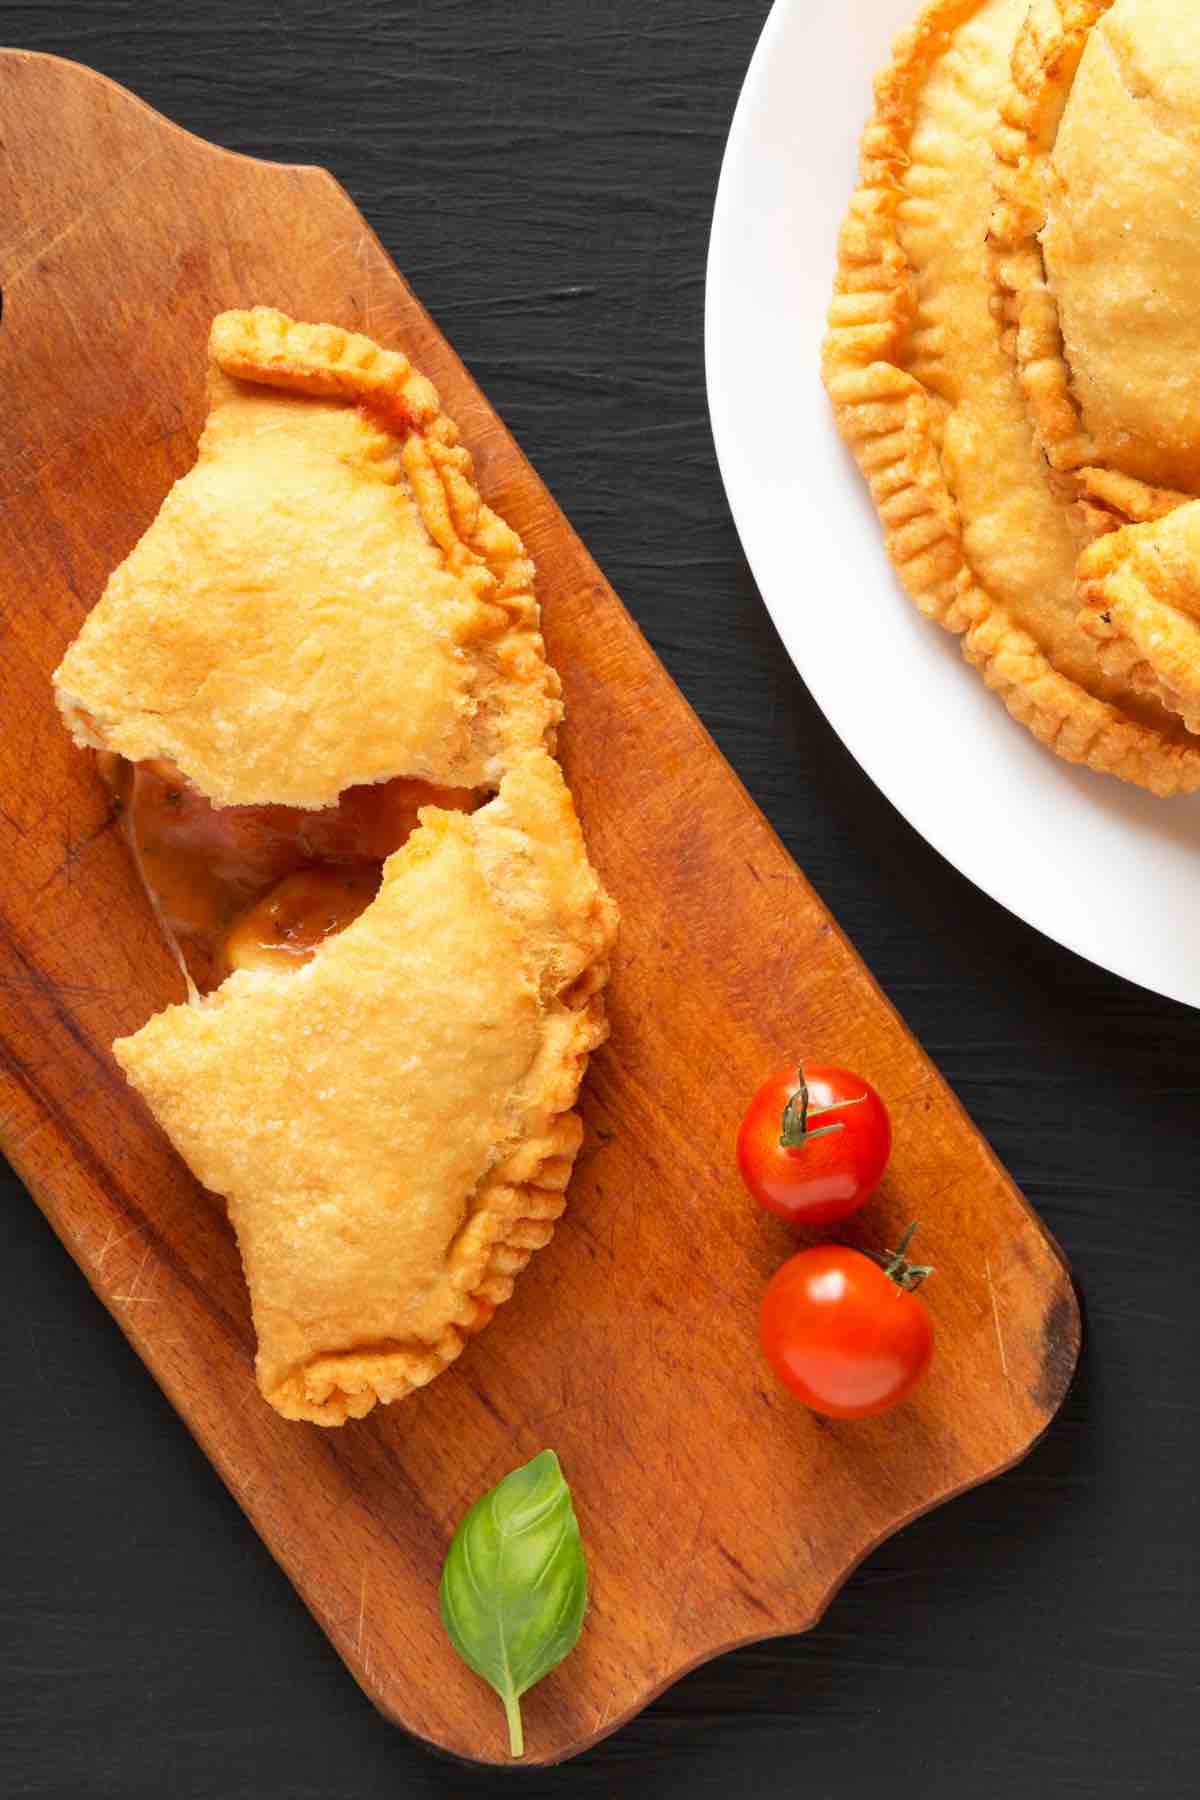 Easy Panzerotti (or Panzarotti) is an Italian savory turnover like a mini pizza pocket and it’s super easy to make at home! A pizza dough crust is filled with all the classic toppings – pepperoni, cheese, and your choice of sauce. These semi-circular pockets are then baked or deep-fried to golden perfection. If this sounds like something you might like (how can it not?), check out this authentic recipe.